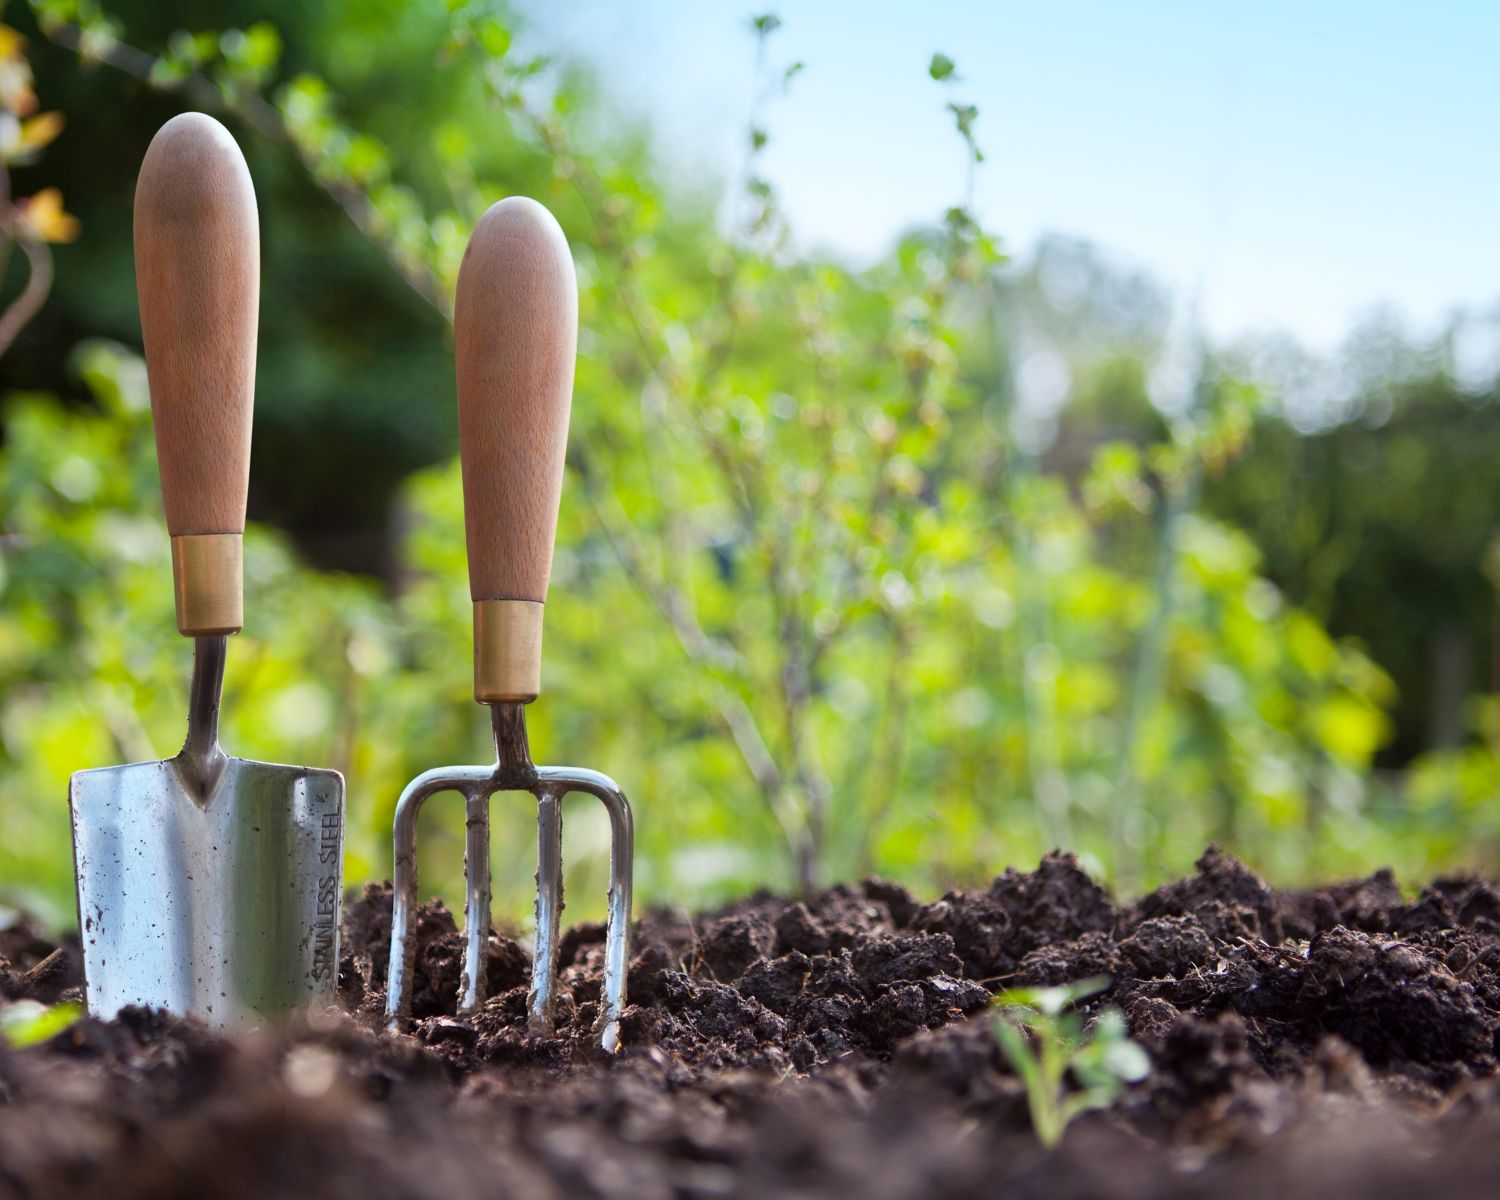 Two gardening tools standing in dirt with greenery in the backgroun